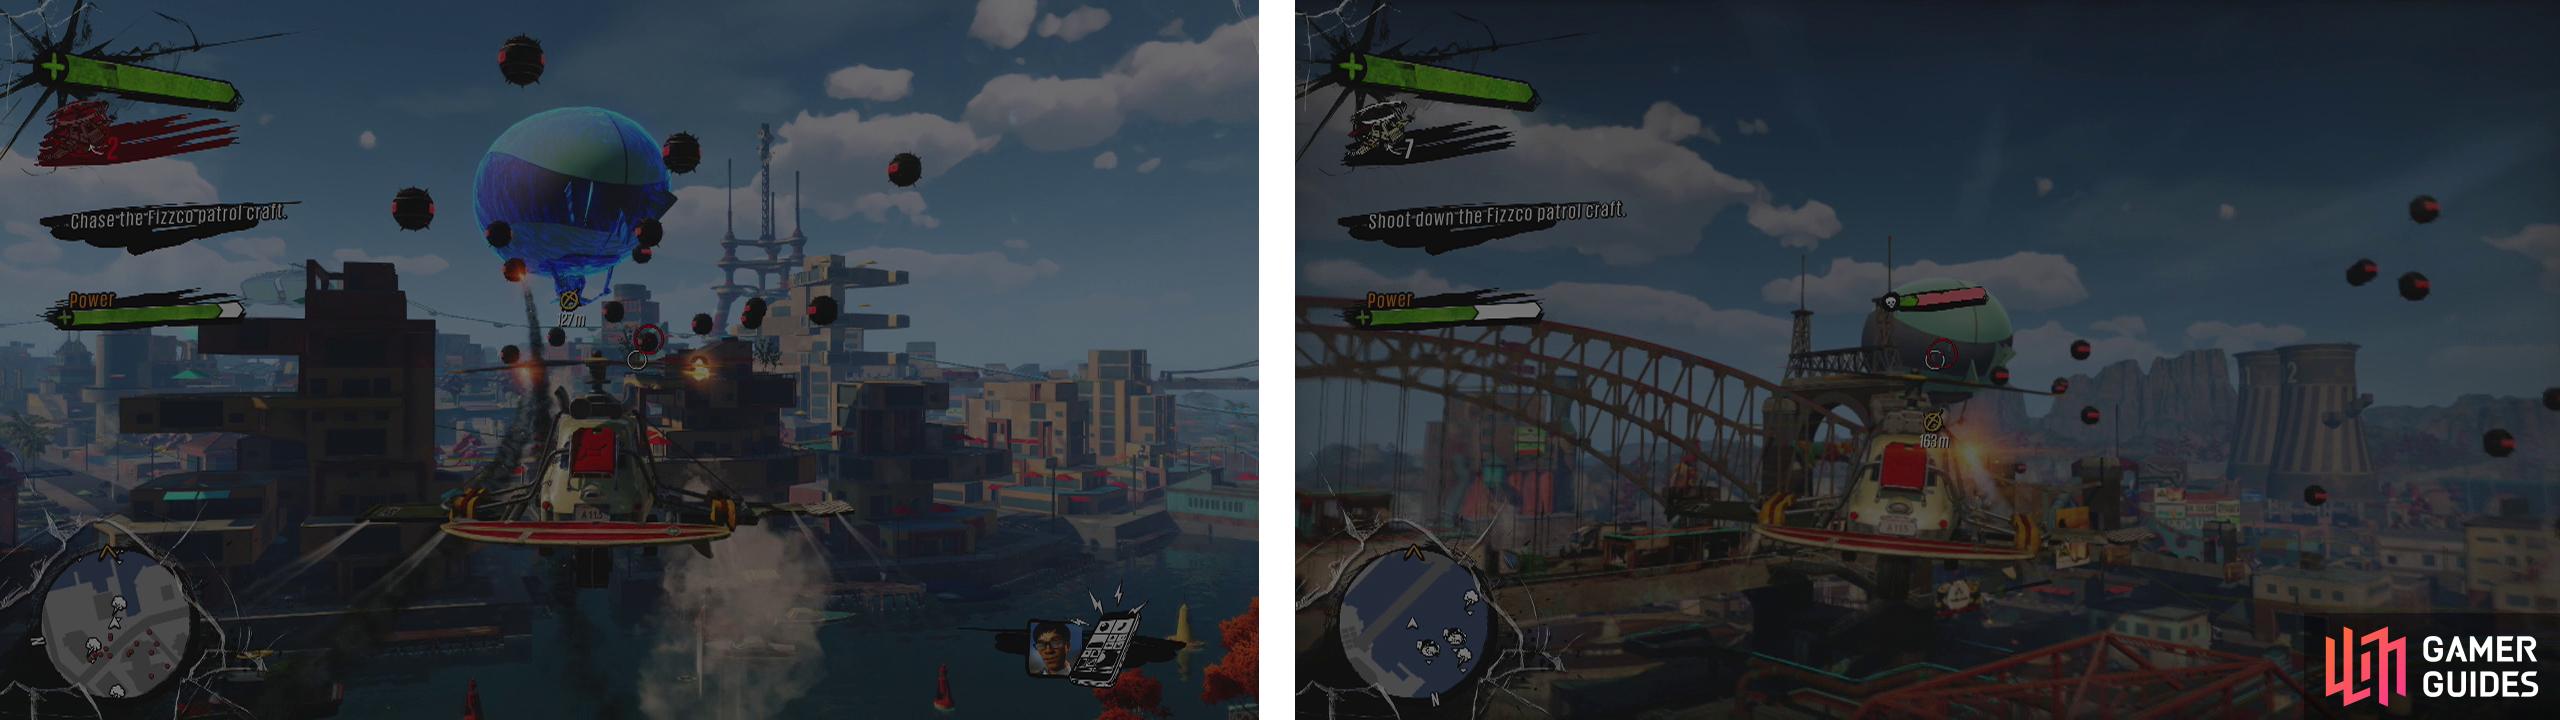 Chase the blimp and destroy or dodge the mines it releases (left). When the blimps shield goes down, destroy it (right).